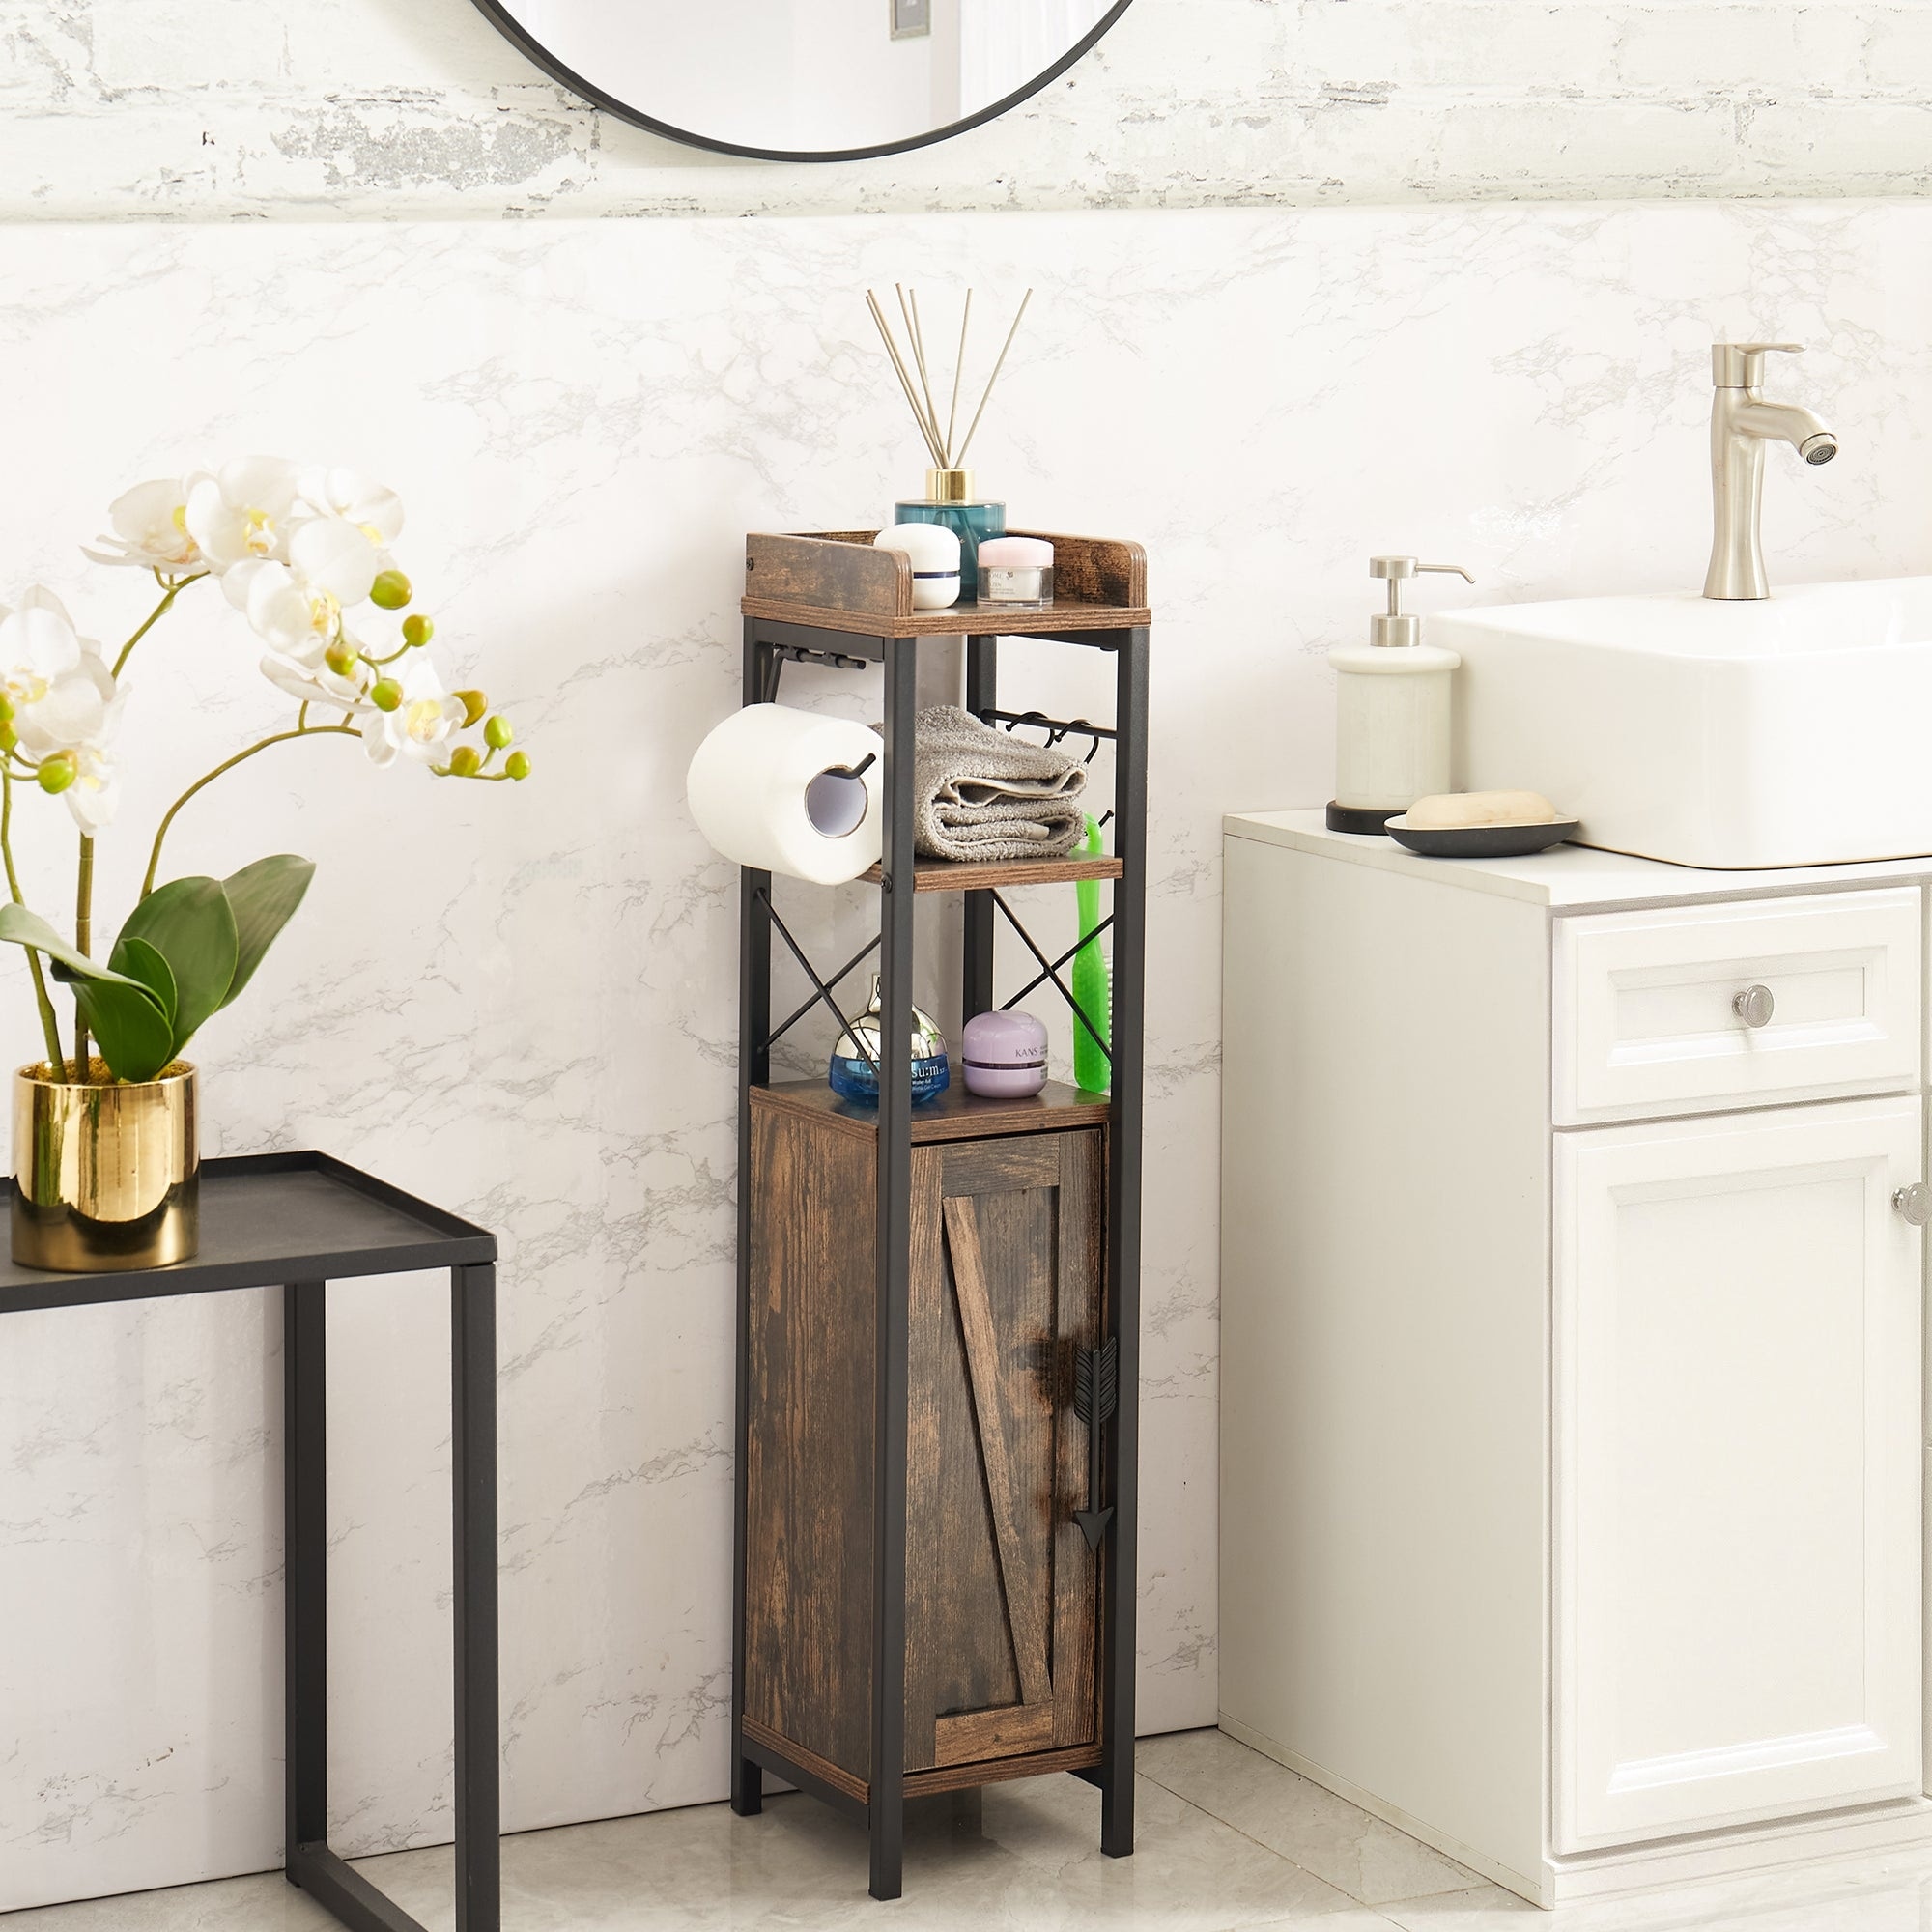 https://ak1.ostkcdn.com/images/products/is/images/direct/9c556d66eecc64ce1590feac3d6fe524f35c67bb/Wood-Tall-Bathroom-Linen-Cabinet-Small-Bathroom-Storage-Corner-Floor-Cabinet-with-Doors-and-Shelves-Toilet-Paper-Holder.jpg